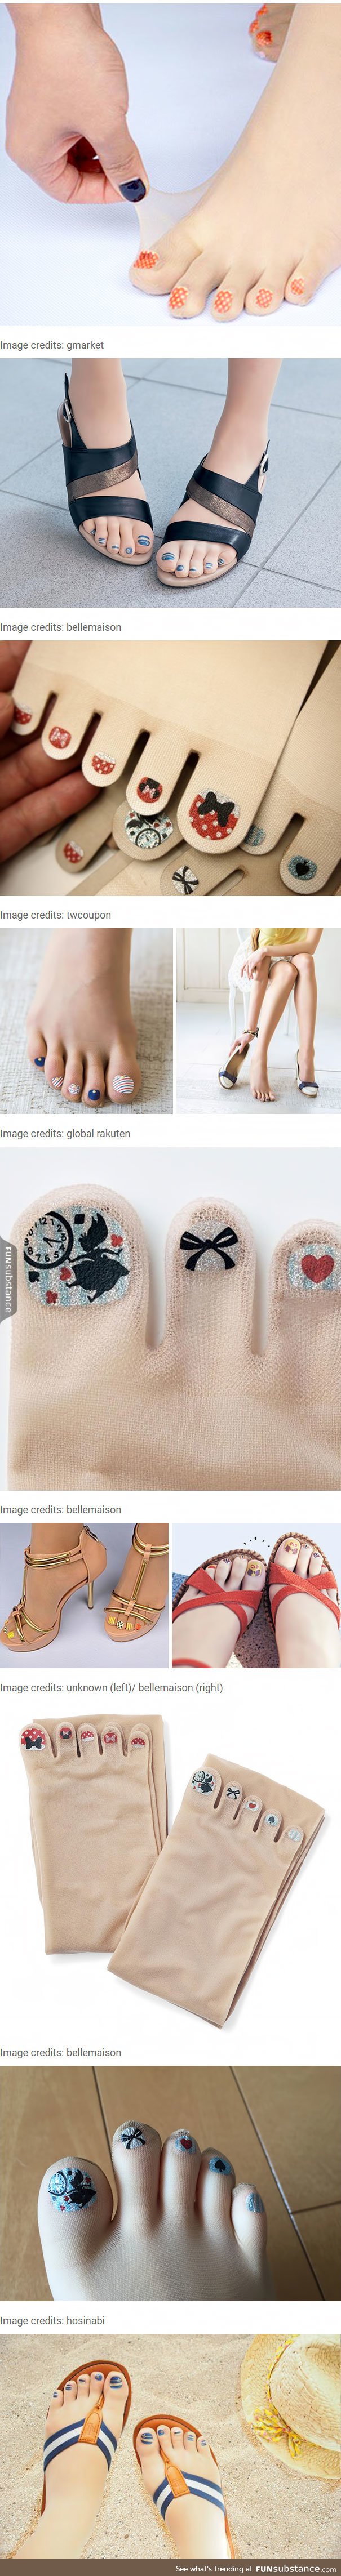 Stockings With Pre-Painted Toenails Are The Latest Trend In Japan